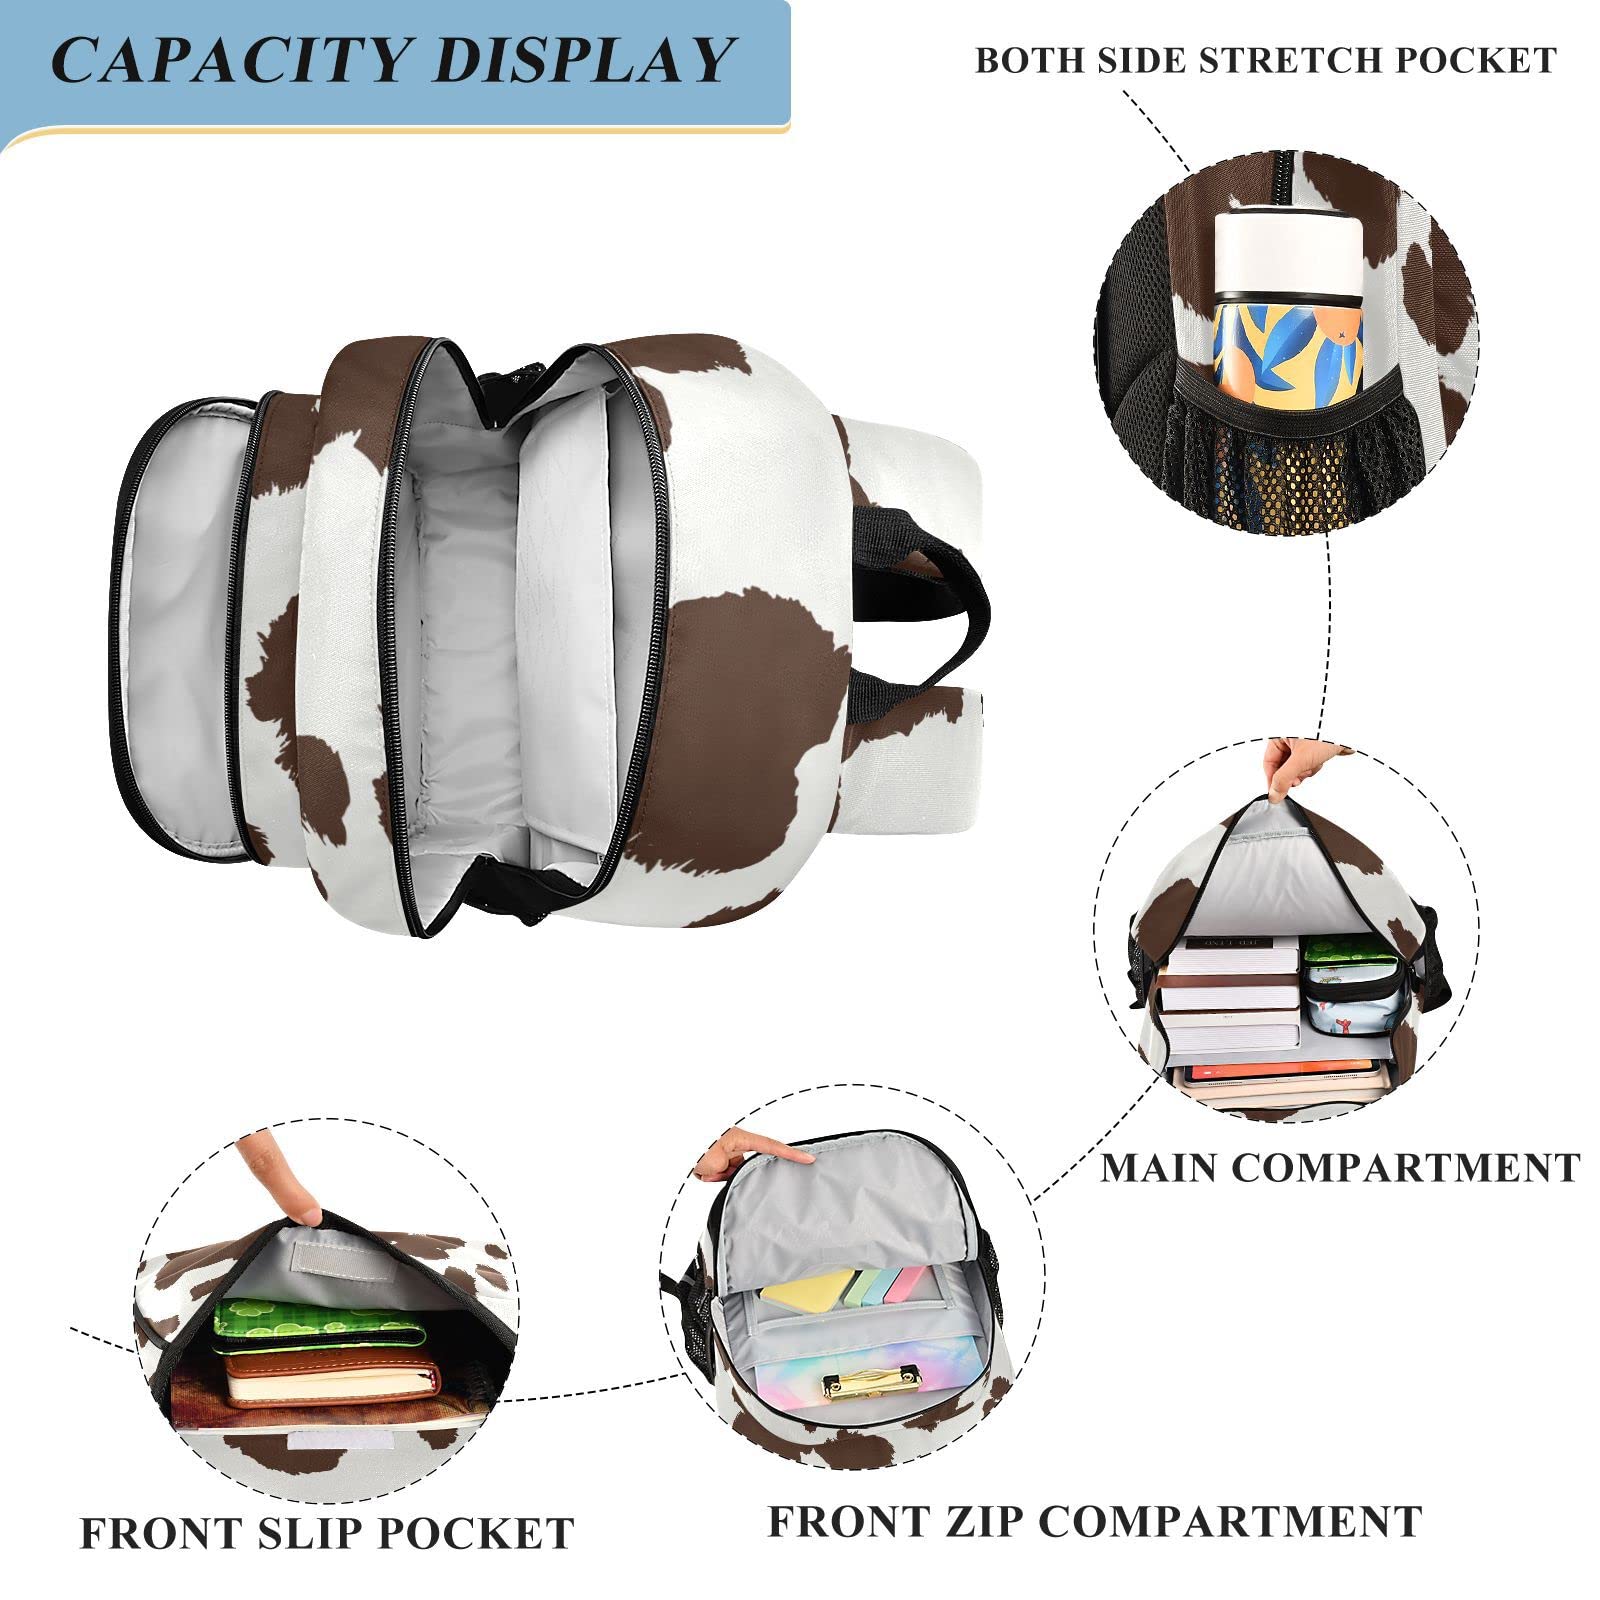 ALAZA Cow Print Laptop Backpack Purse for Women Men Travel Bag Casual Daypack with Compartment & Multiple Pockets